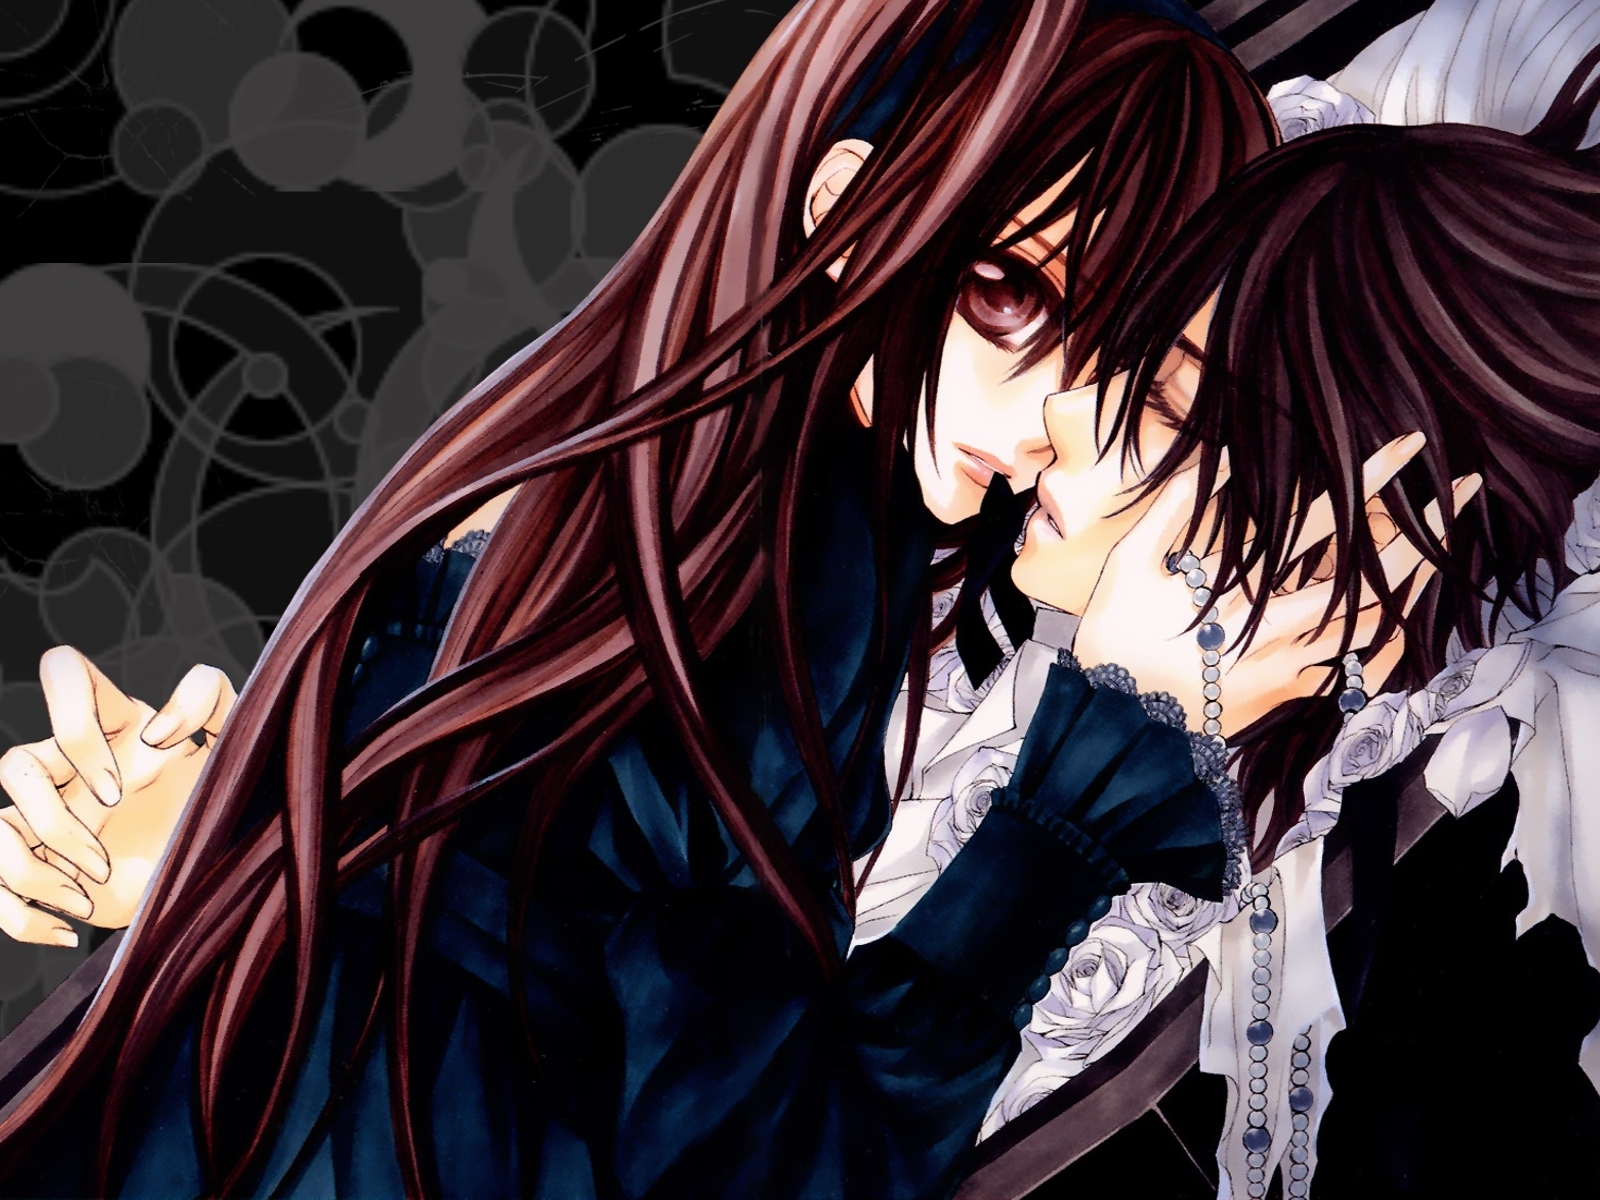 Vampire Knight Wallpapers Anime Hq Vampire Knight Pictures 4k Wallpapers 19